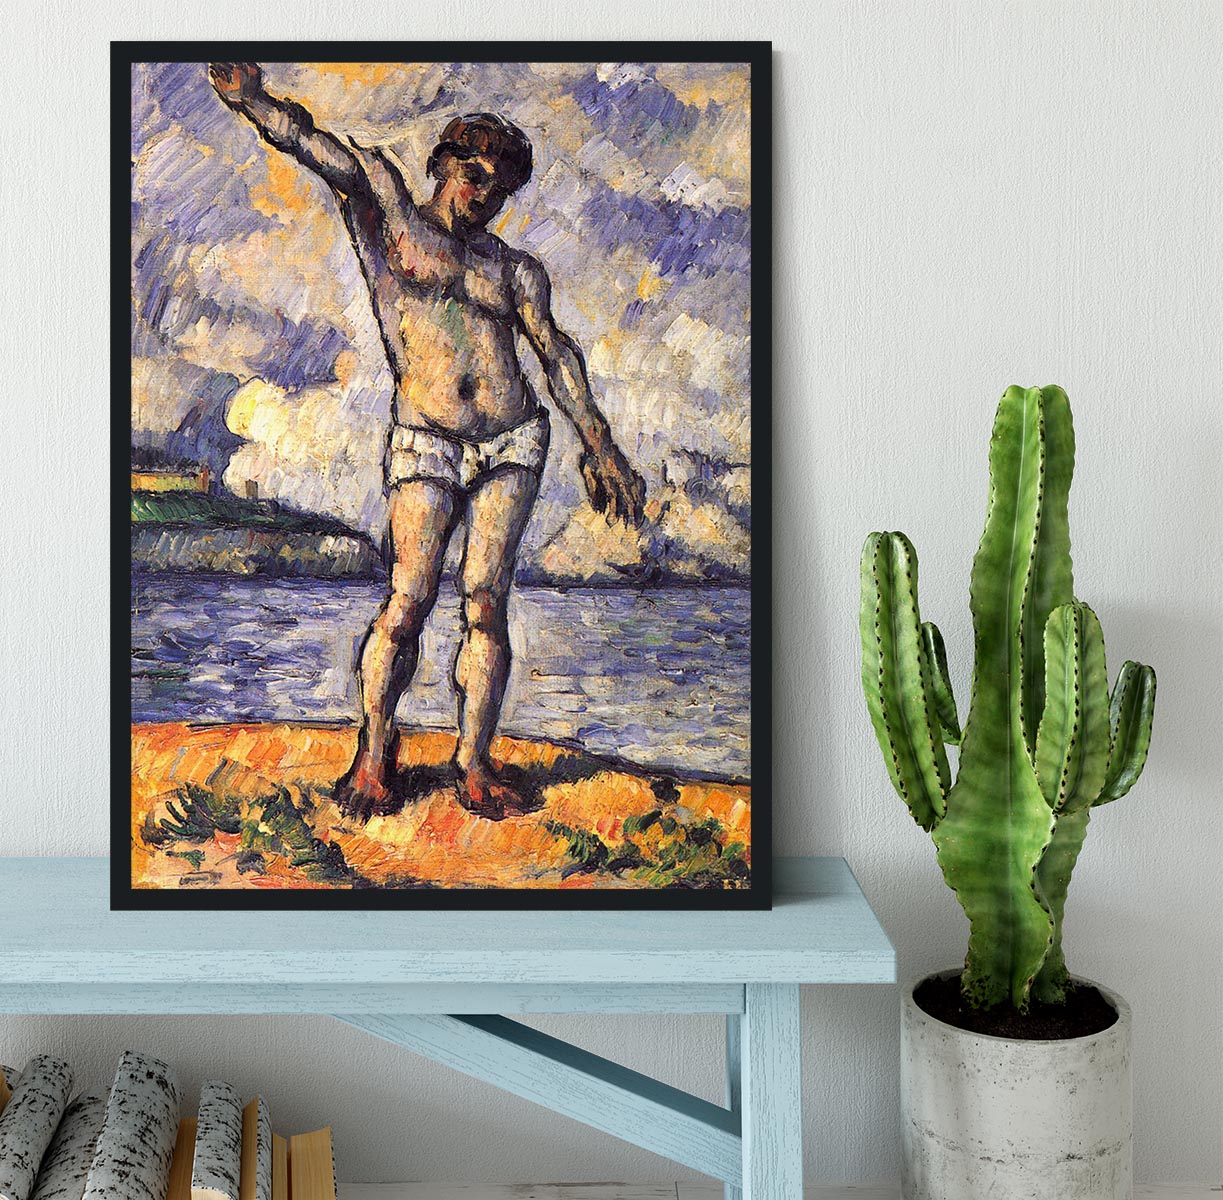 Swimmer with outstretched arms by Cezanne Framed Print - Canvas Art Rocks - 2